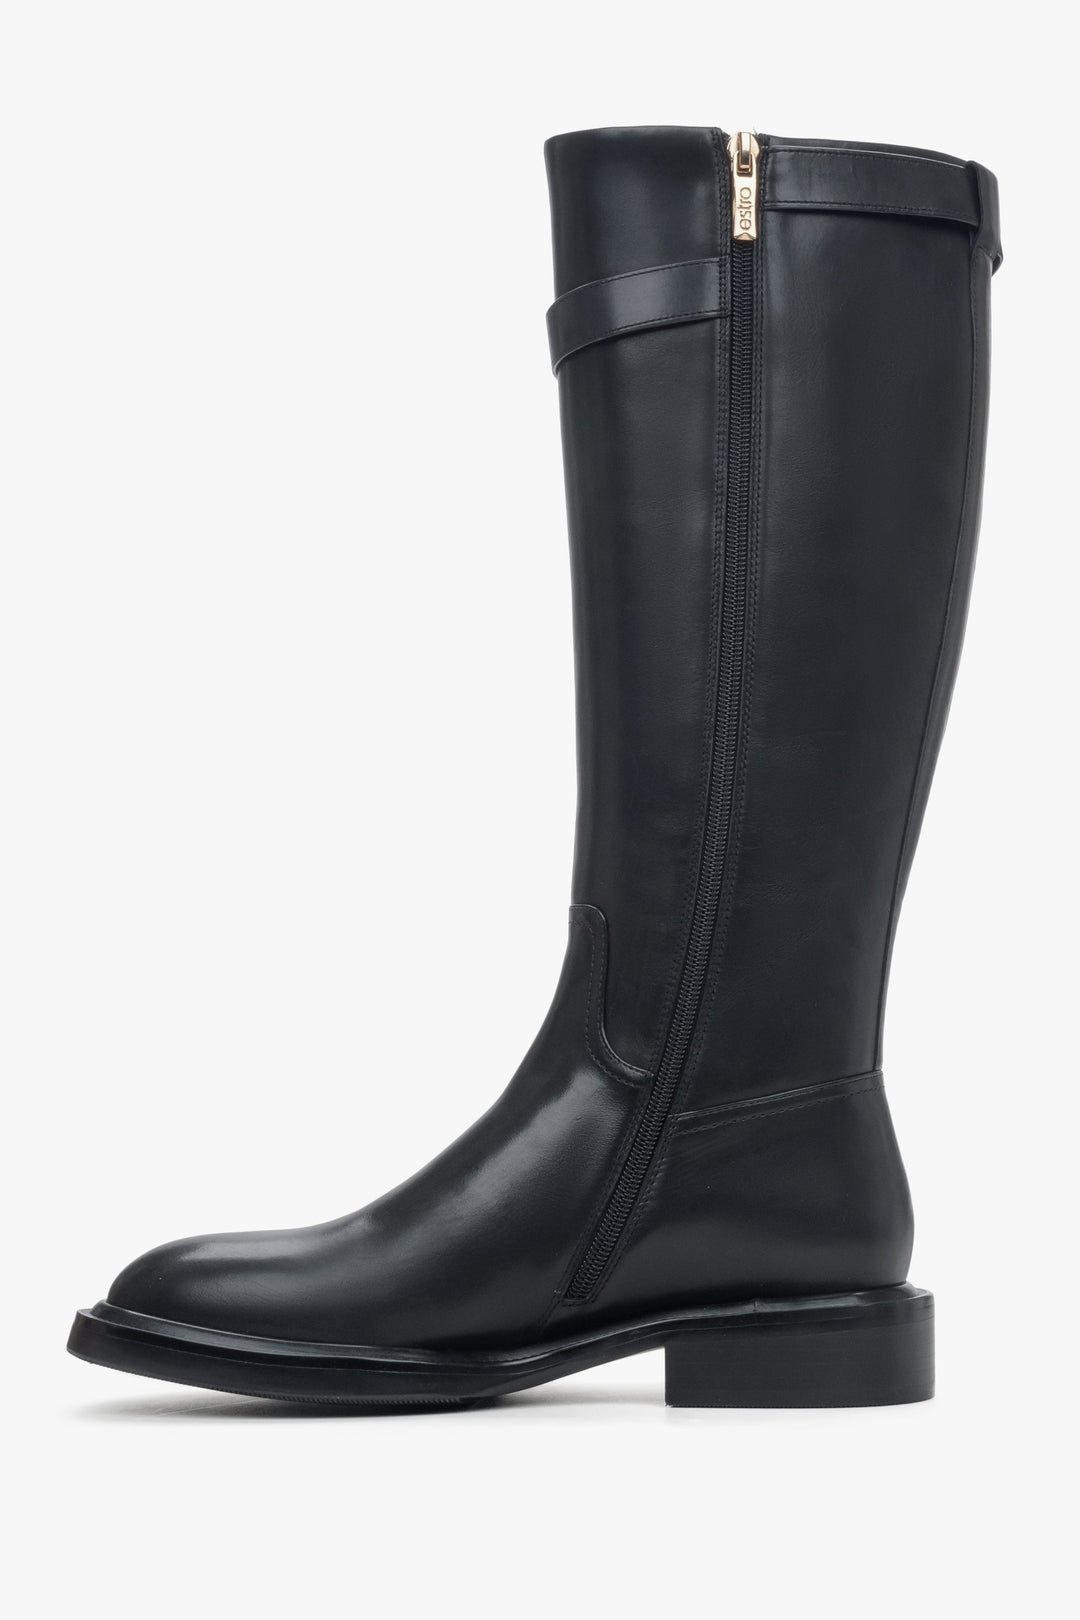 Women's black leather knee-high boots with a decorative strap - shoe profile.